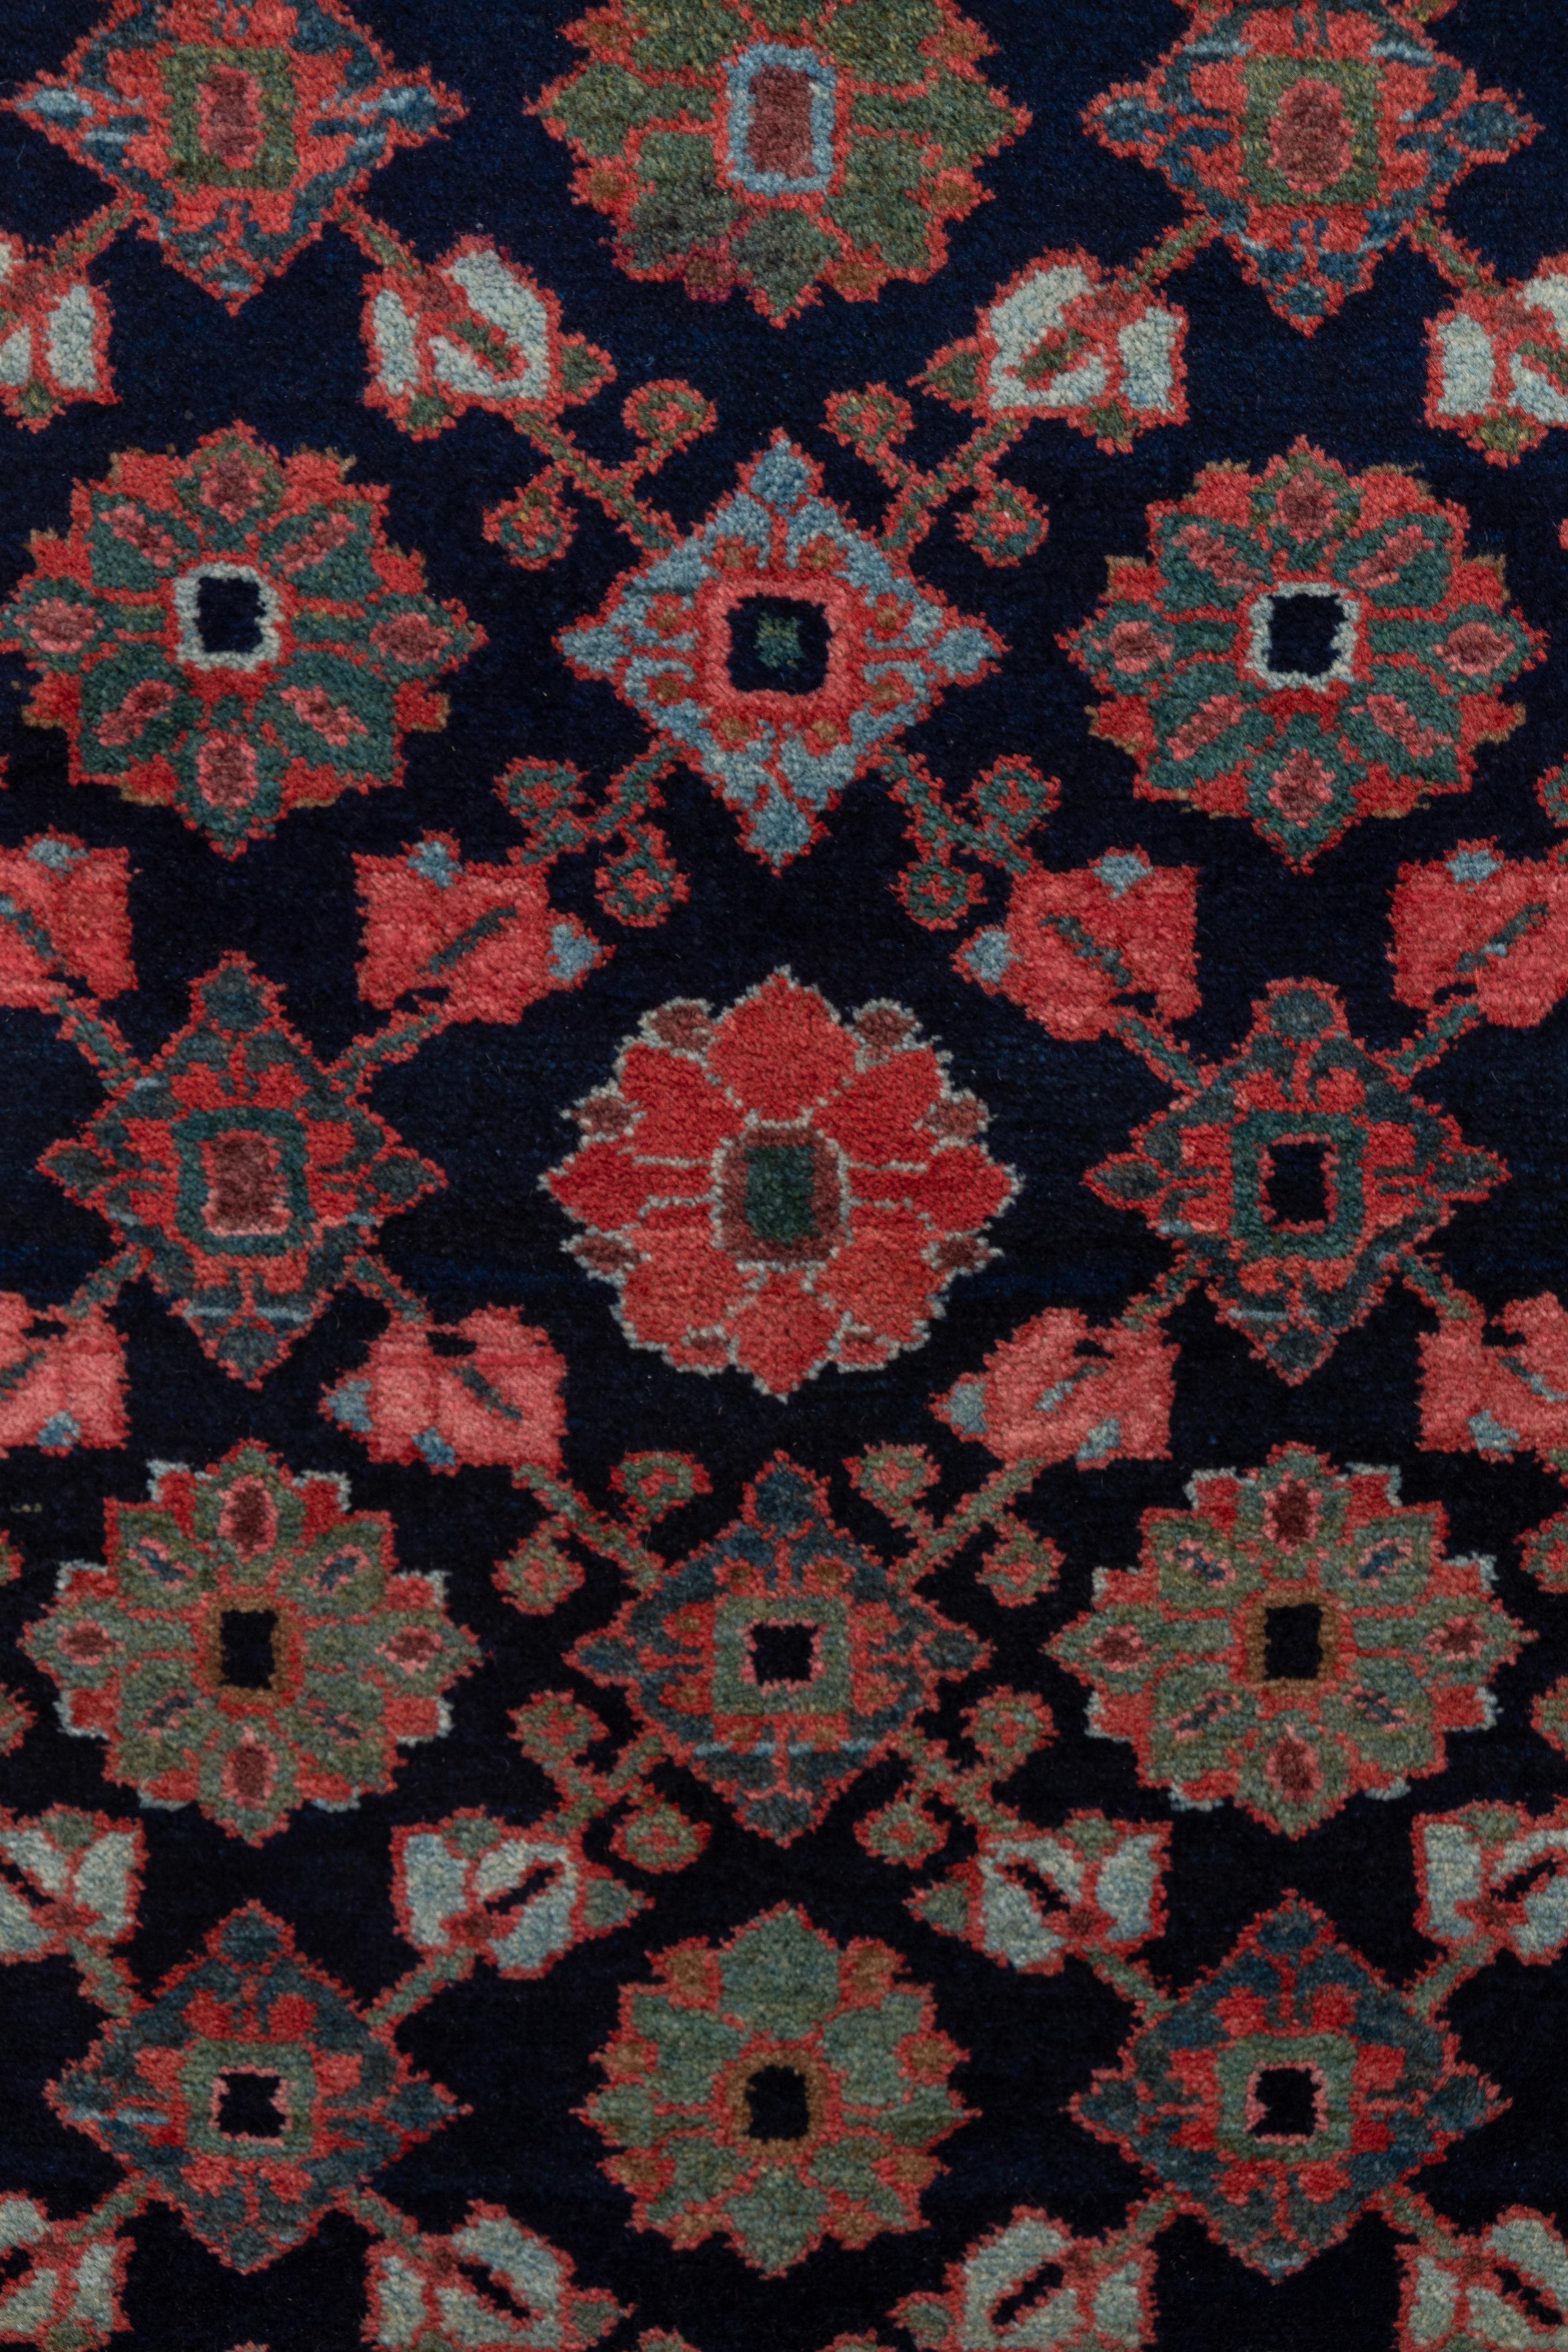 Hand-Woven Antique Top Condition Malayer Runner